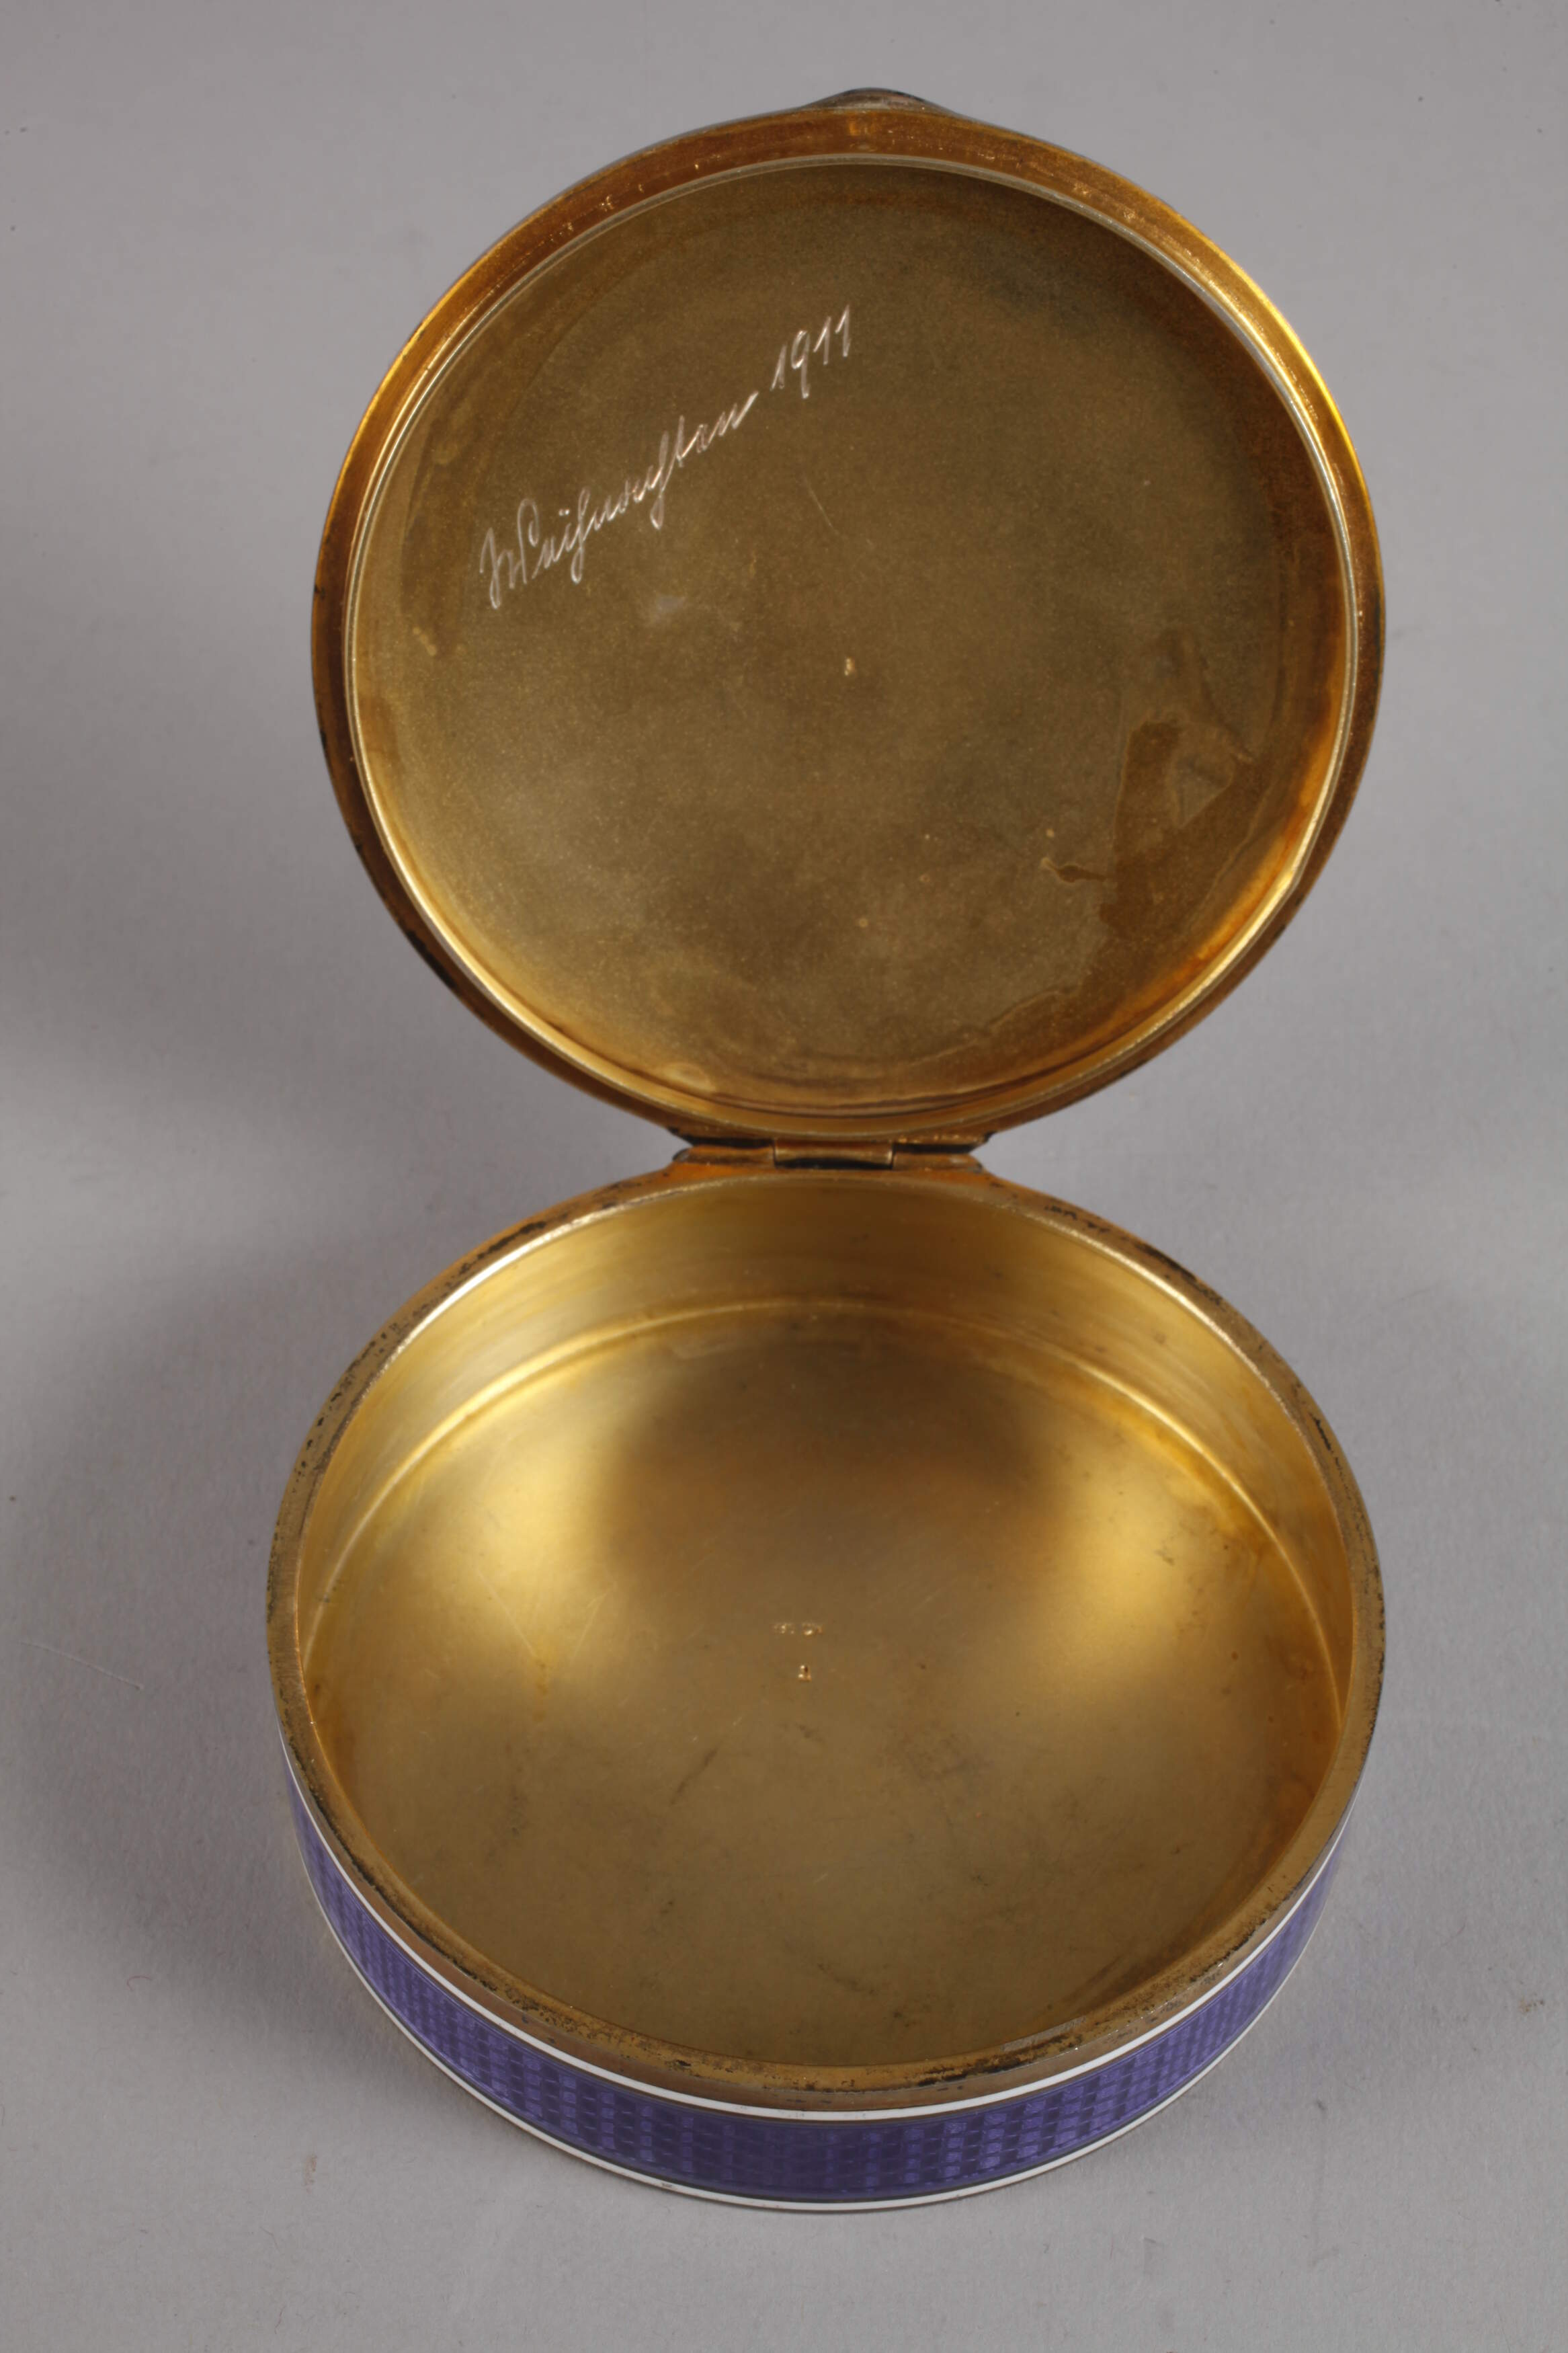 Round silver box with guilloché enamel - Image 4 of 6